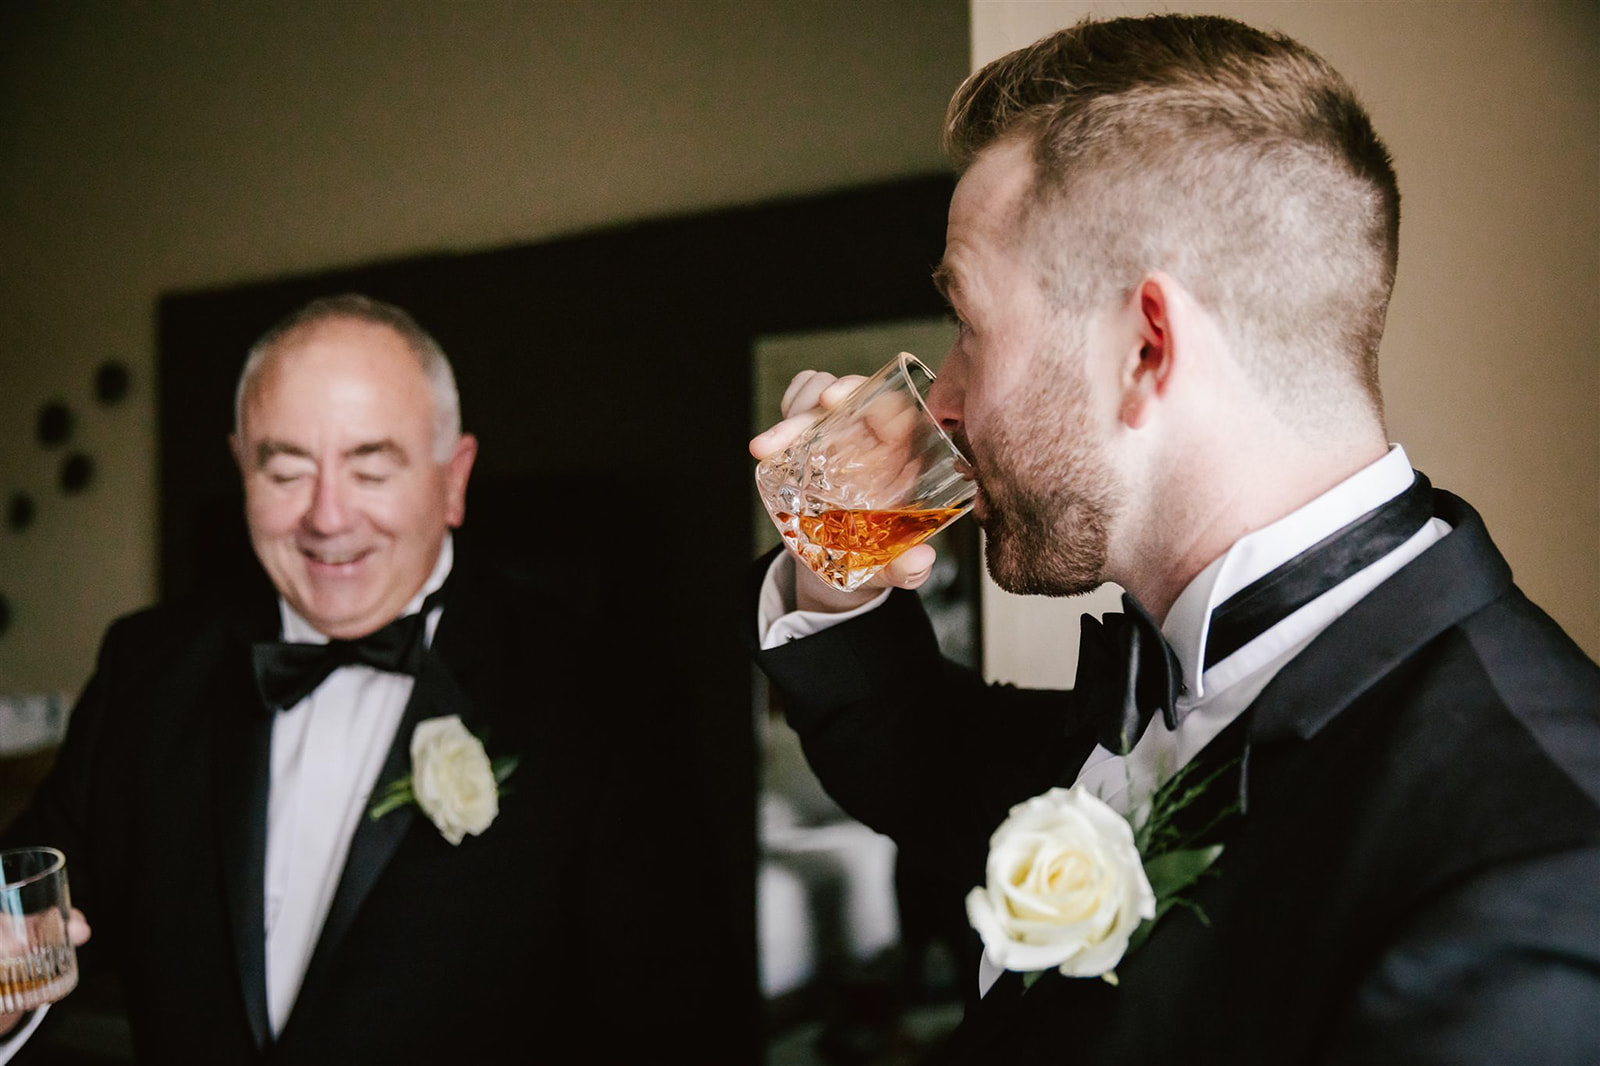 Groom's getting ready includes a classic whiskey toast, setting the tone for a day filled with celebration.